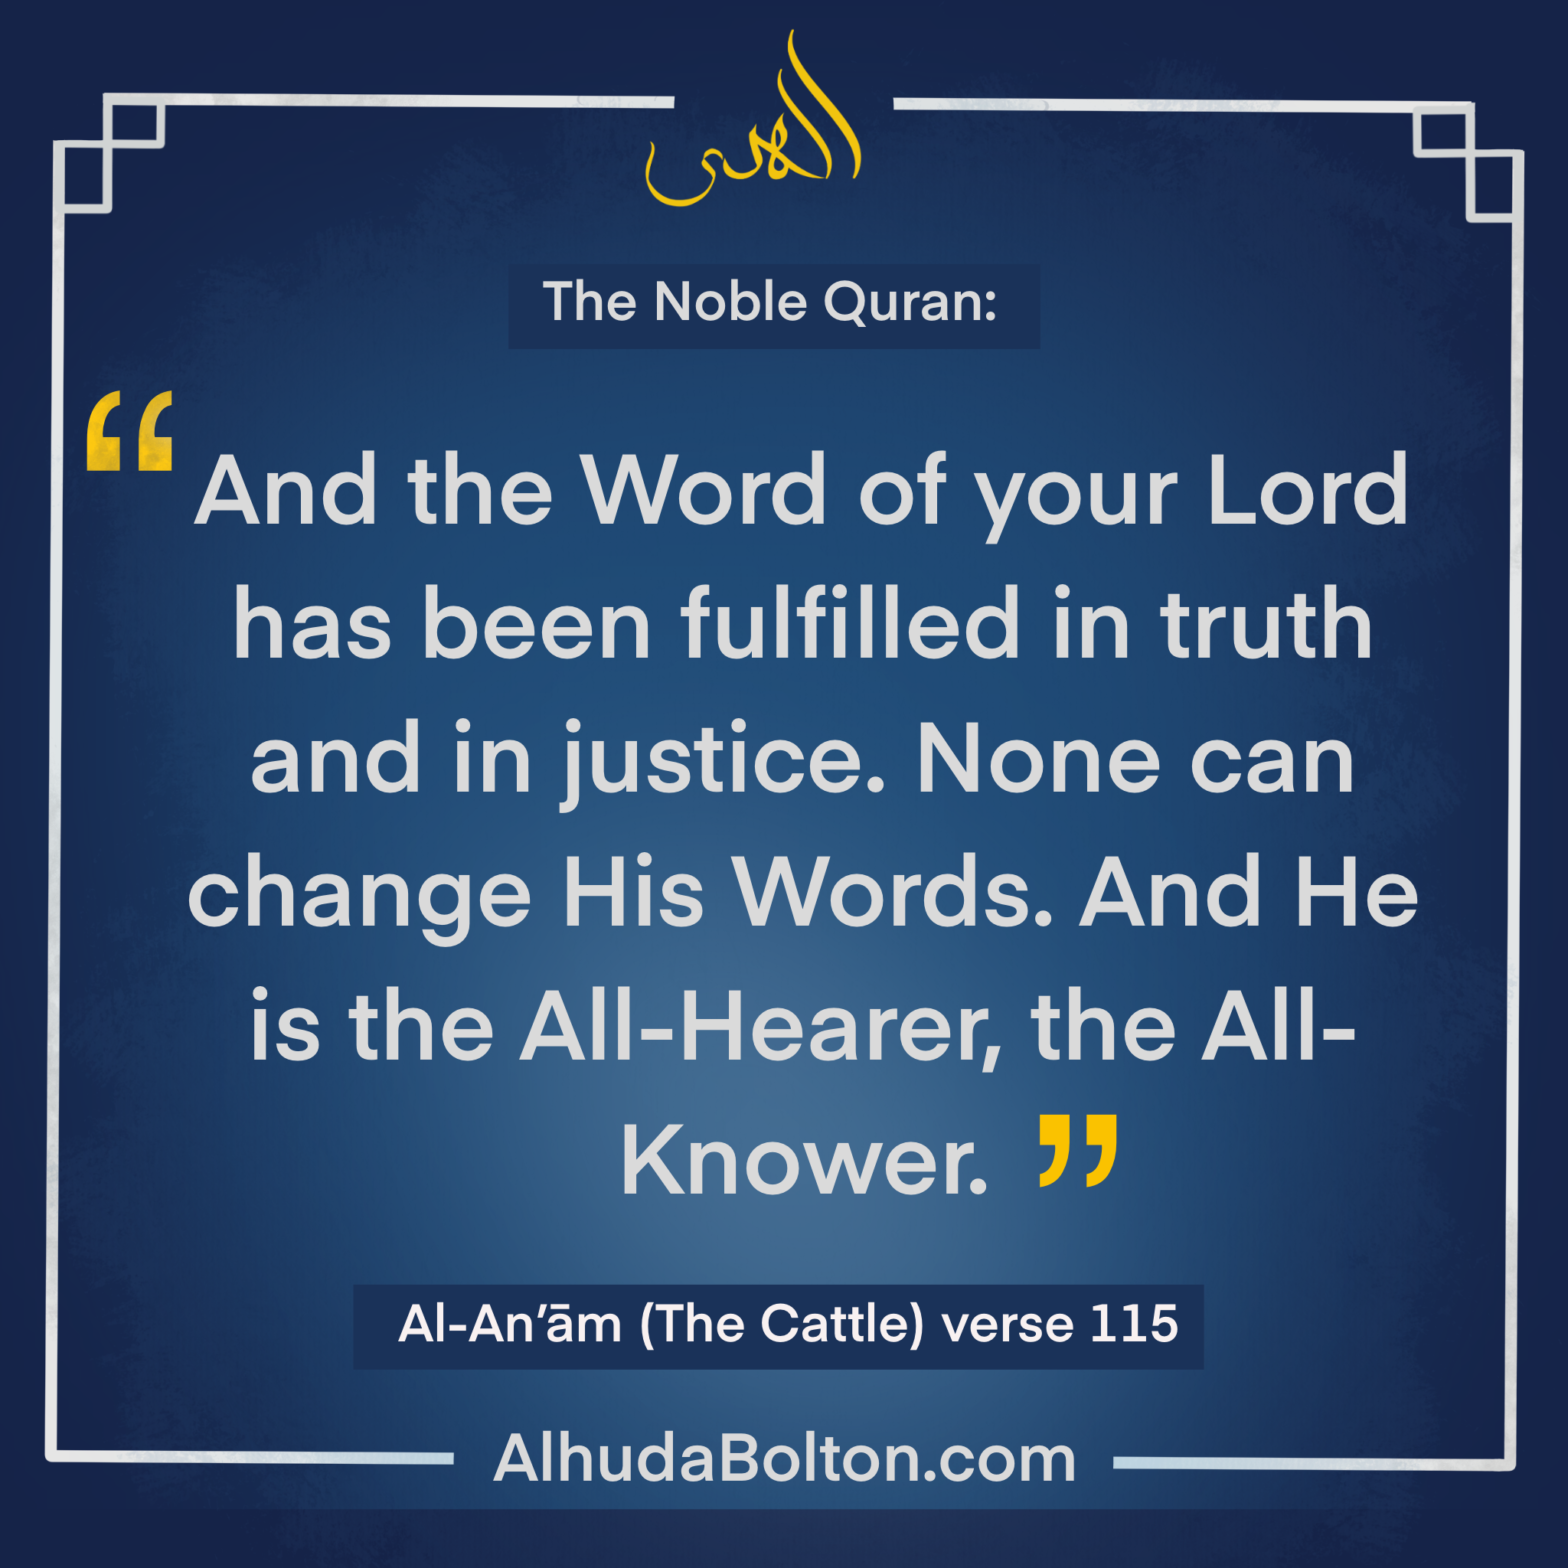 Weekly Quran: “And the Word of your Lord has been fulfilled…”